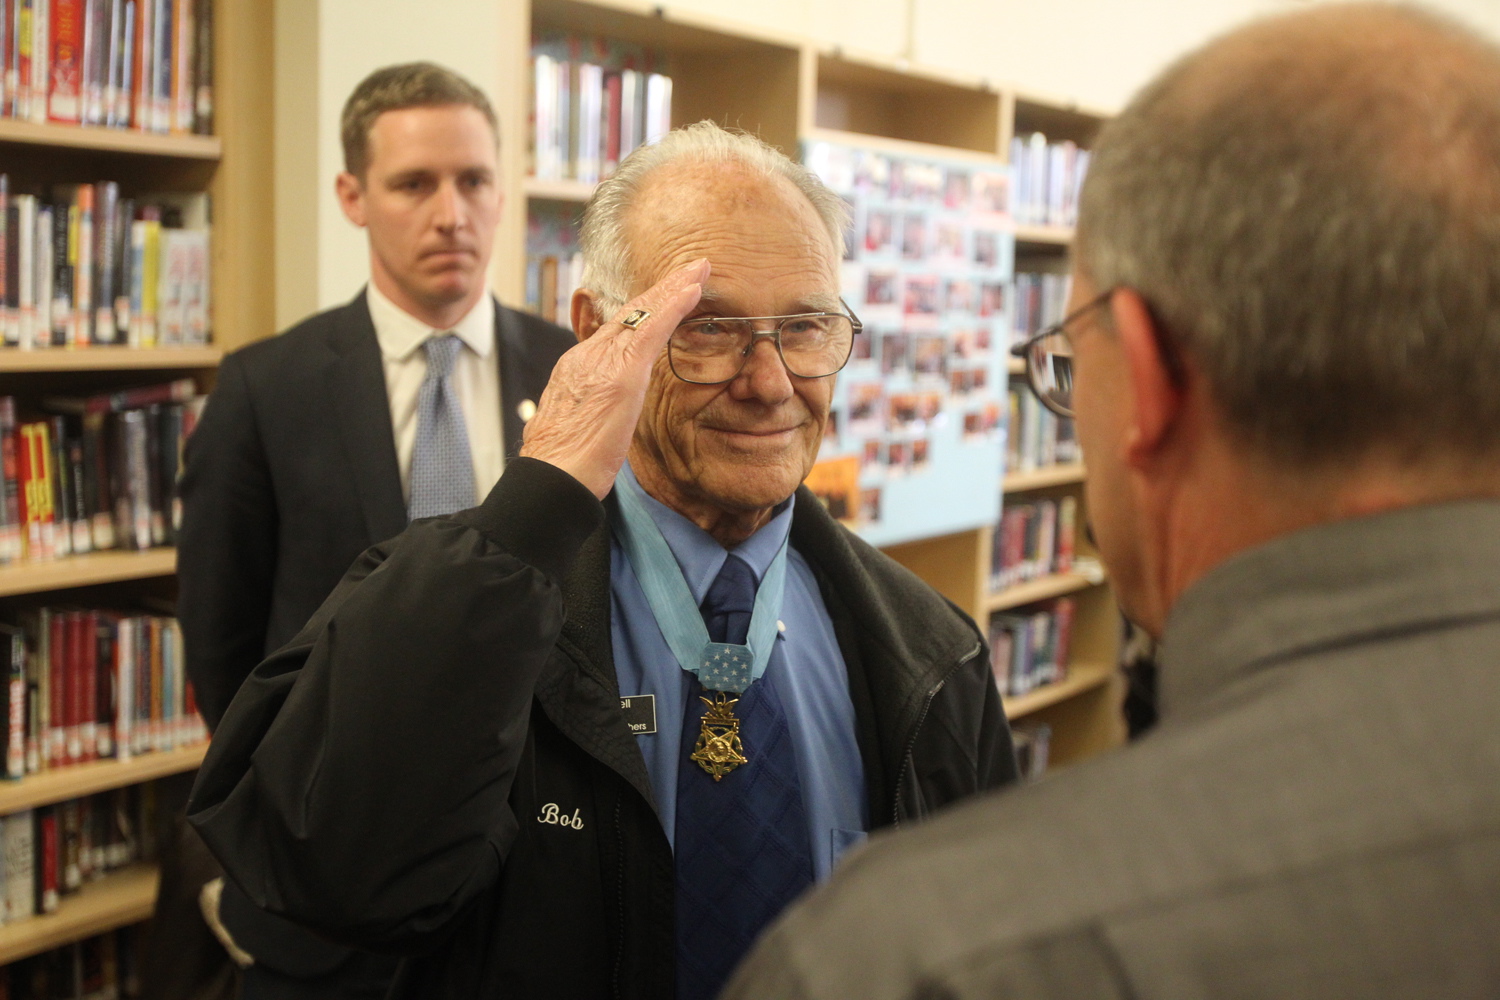 Photos by Andy Tullis/The Bulletin
Bob Maxwell, Medal of Honor recipient, center, attends a ceremony where he received the commemorative stamp from the U.S. Postal Service local postmaster in the library at Bend High School in Bend, Ore., on Friday.